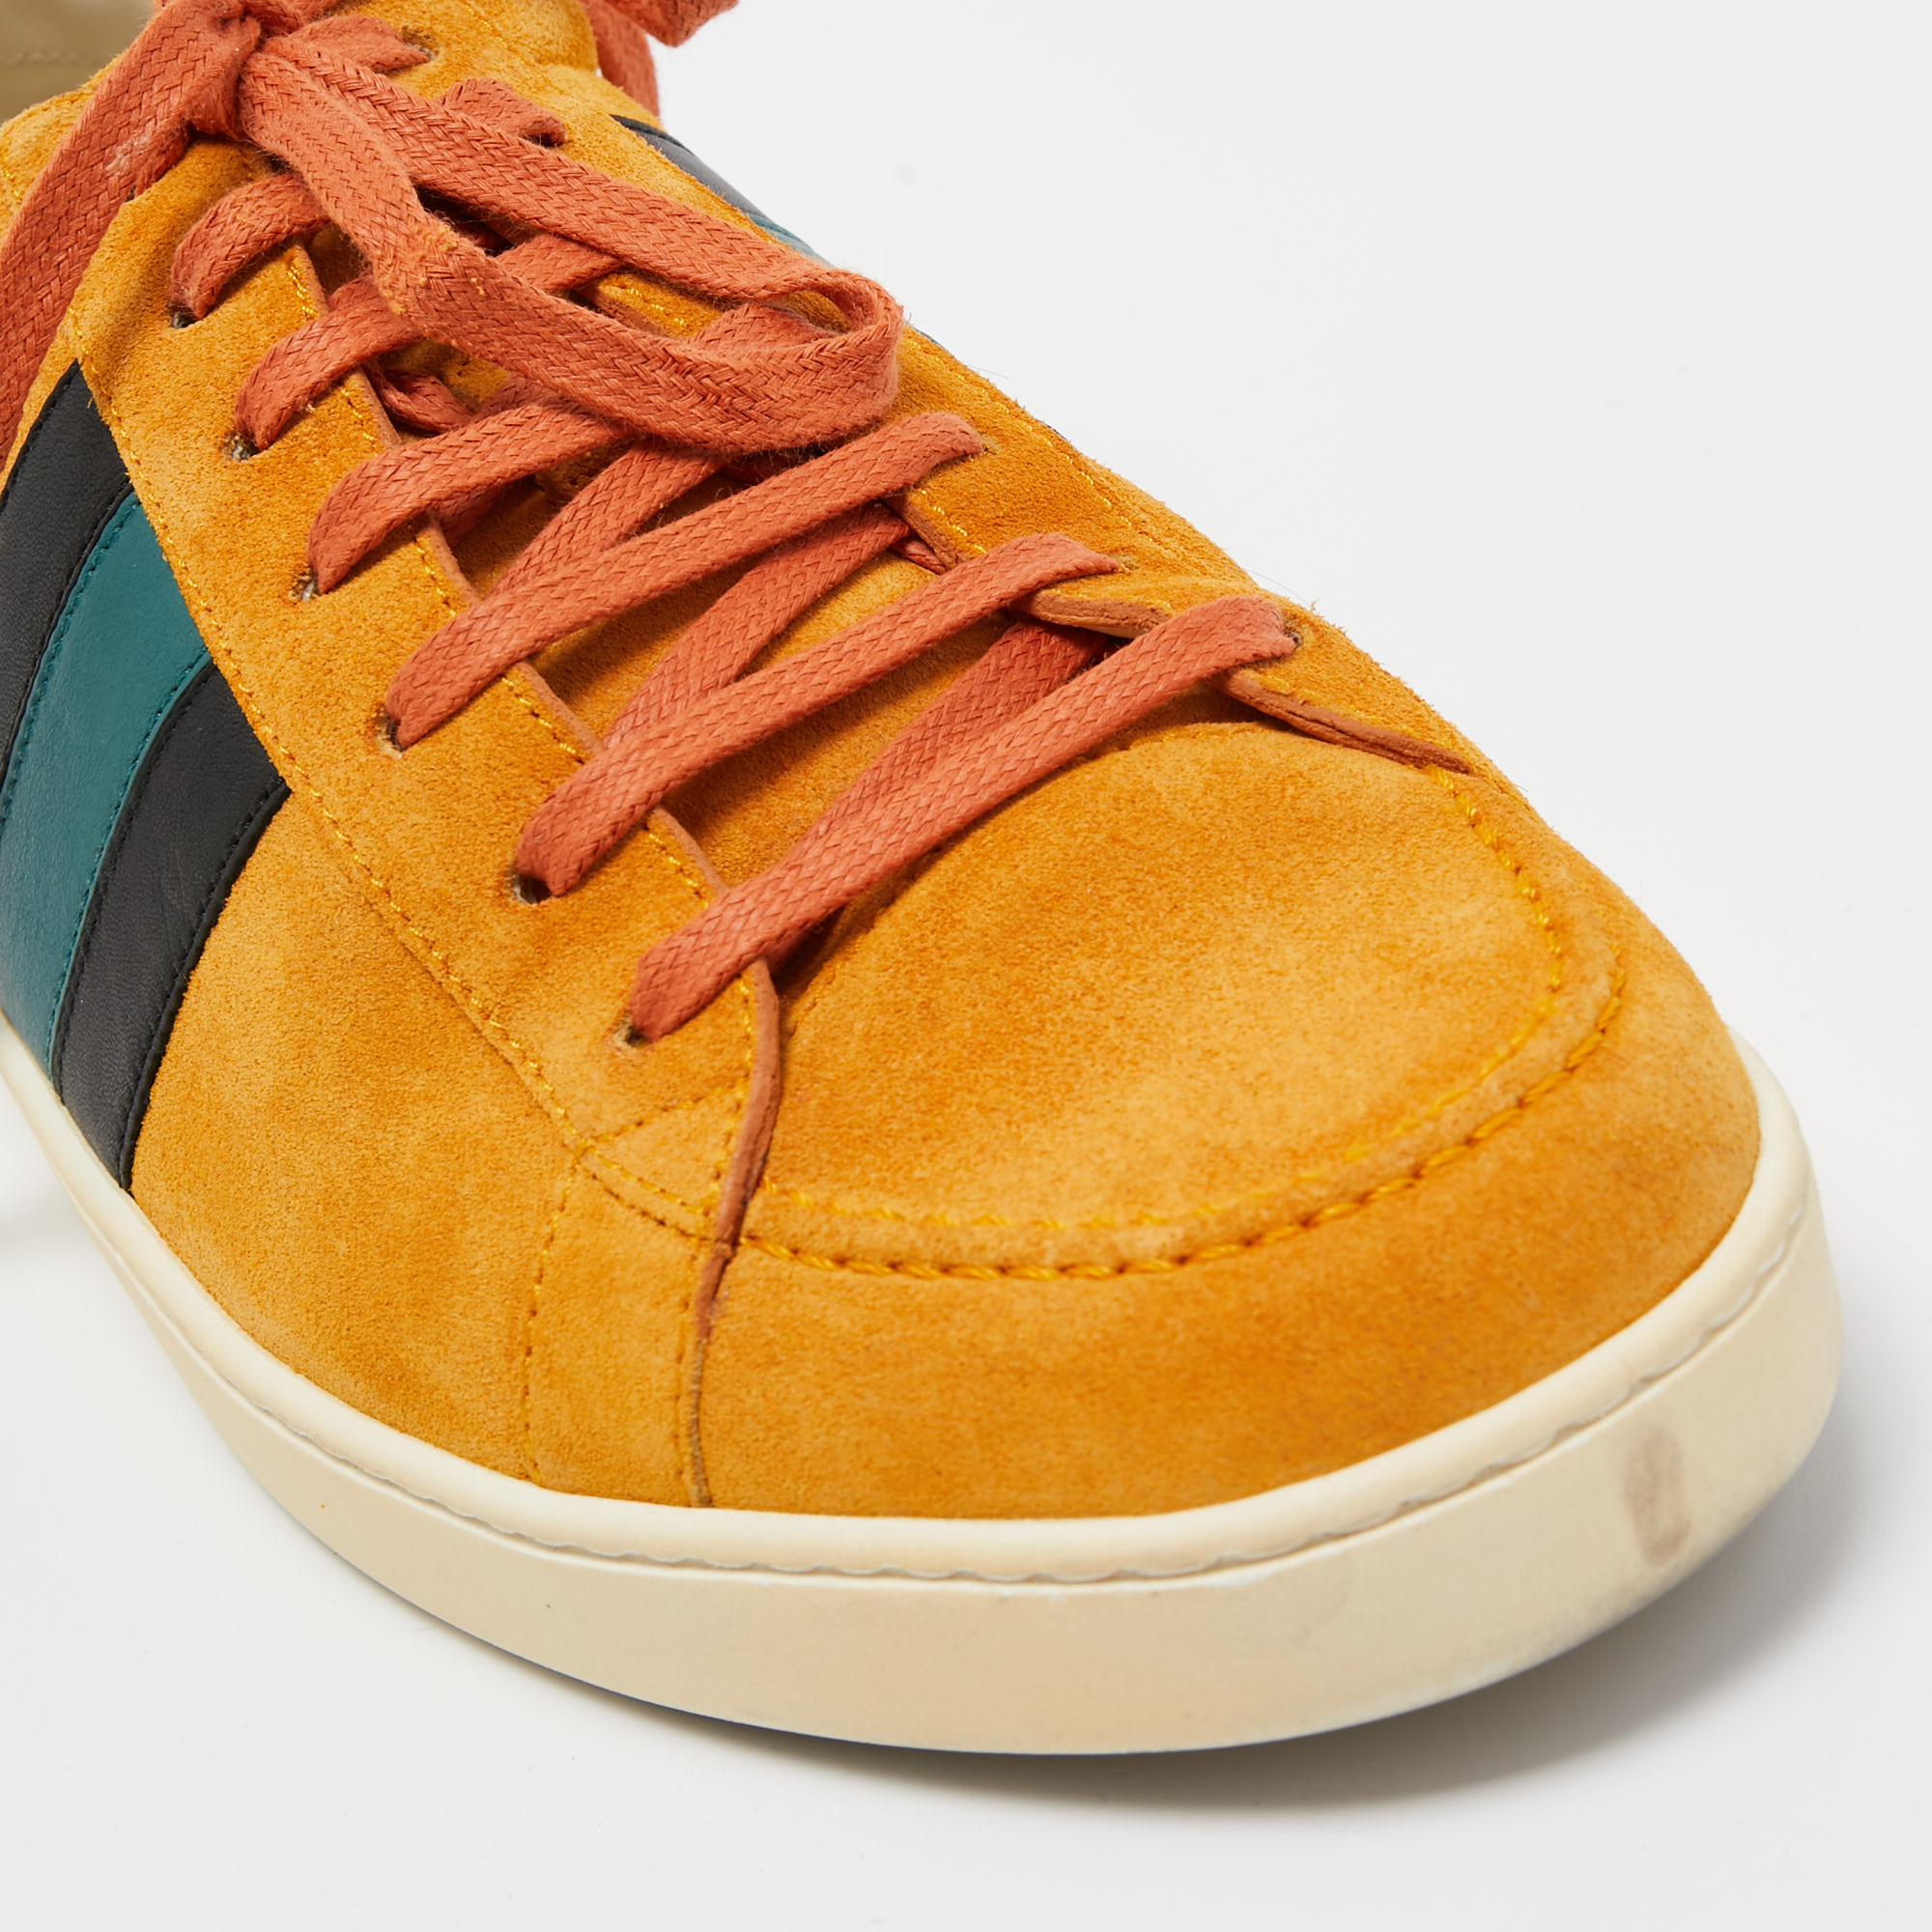 Gucci Mustard Suede Web Low Top Sneakers Size 42.5